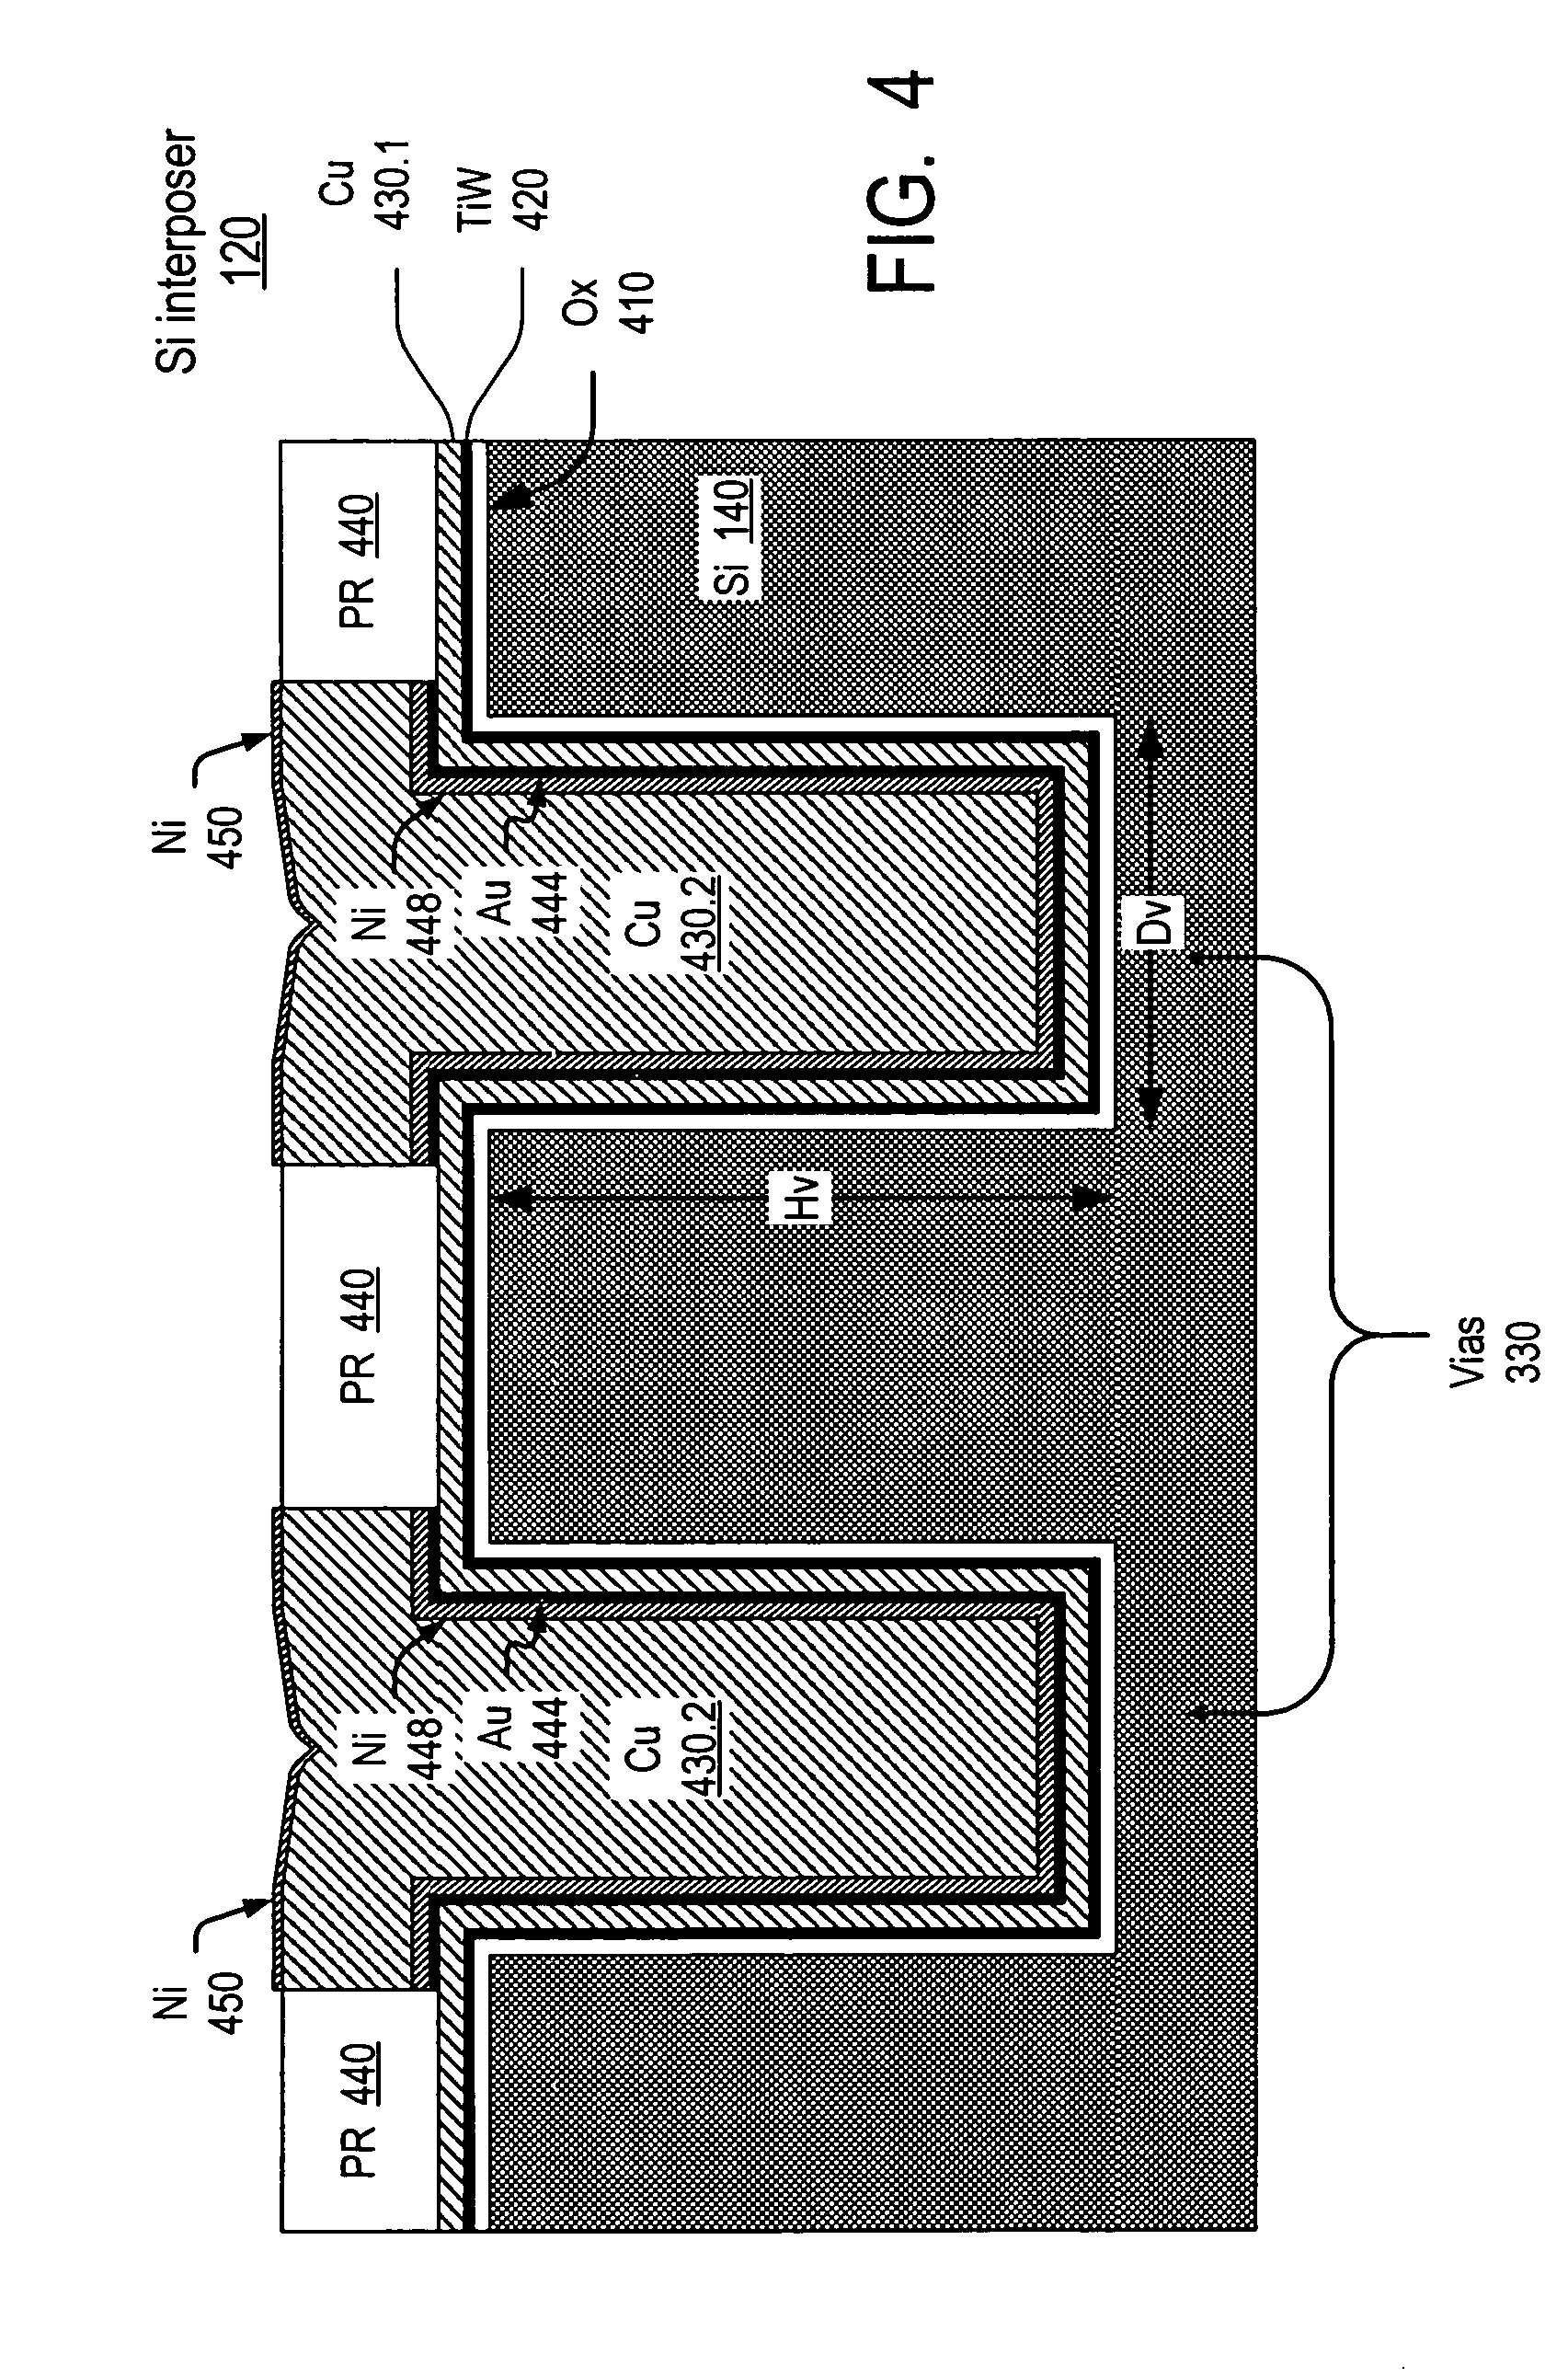 Attachment of integrated circuit structures and other substrates to substrates with vias